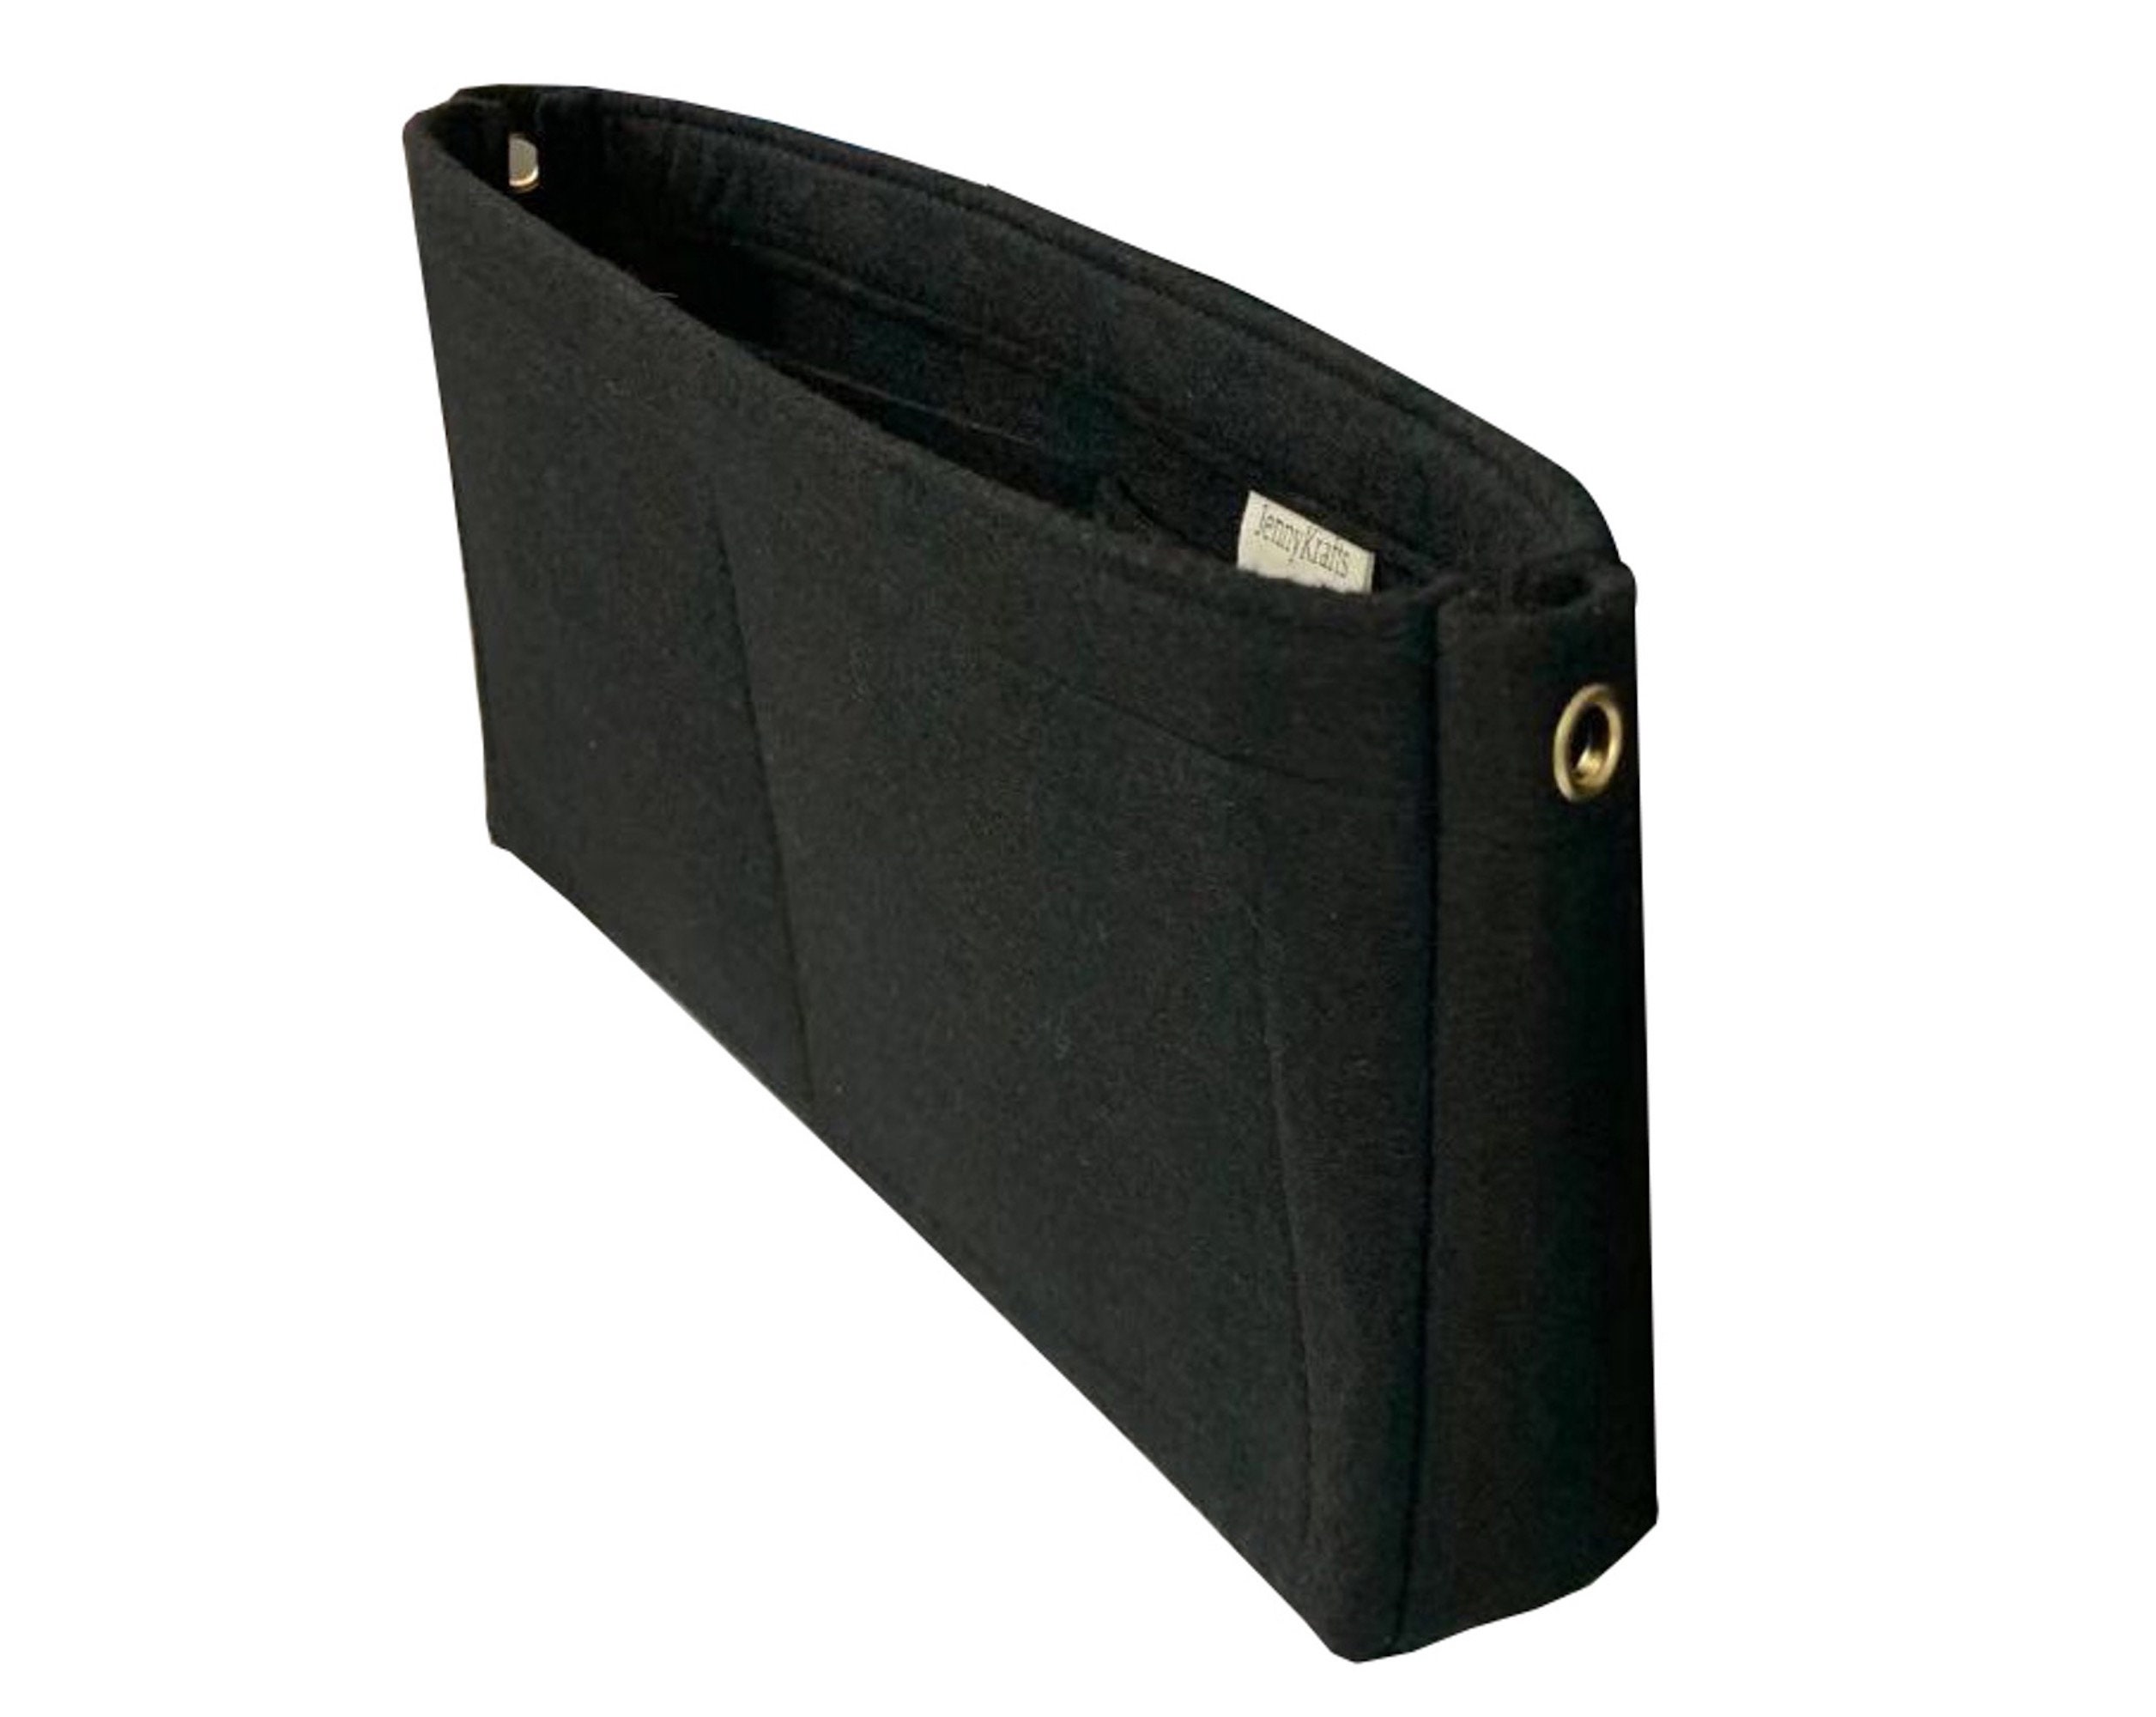 Toiletry Pouch Insert / Organizer / Protector / Shaper W/ or 